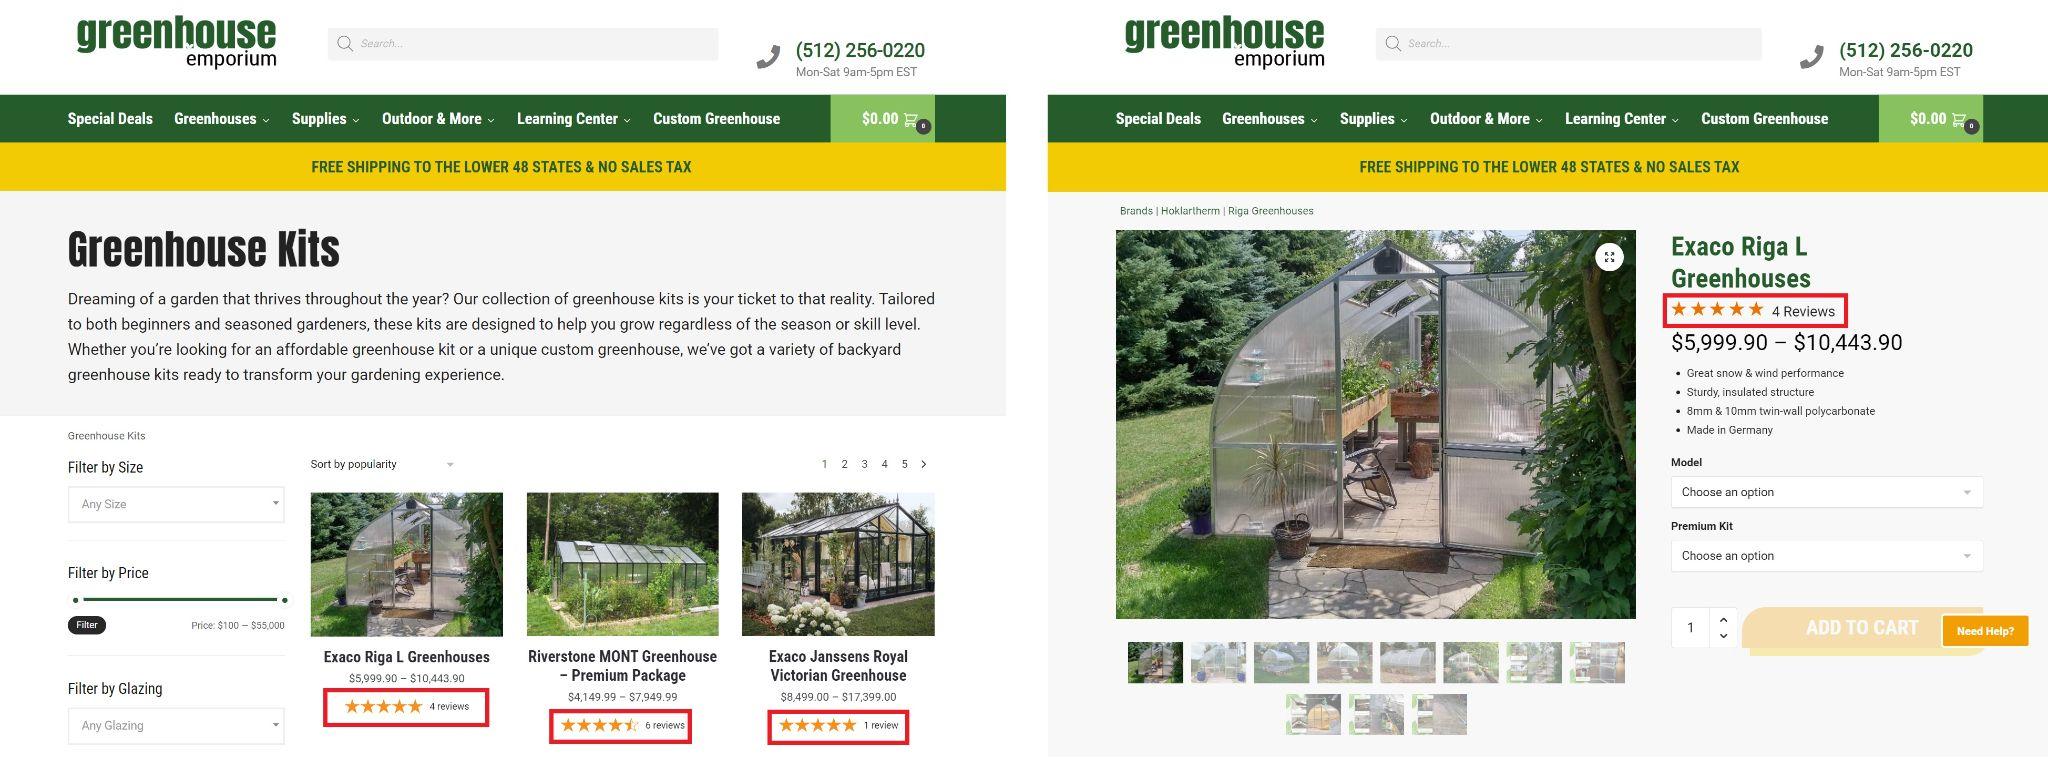 Omnichannel Retailing: Greenhouse Emporium Social Proof on Product Catalog and Pages